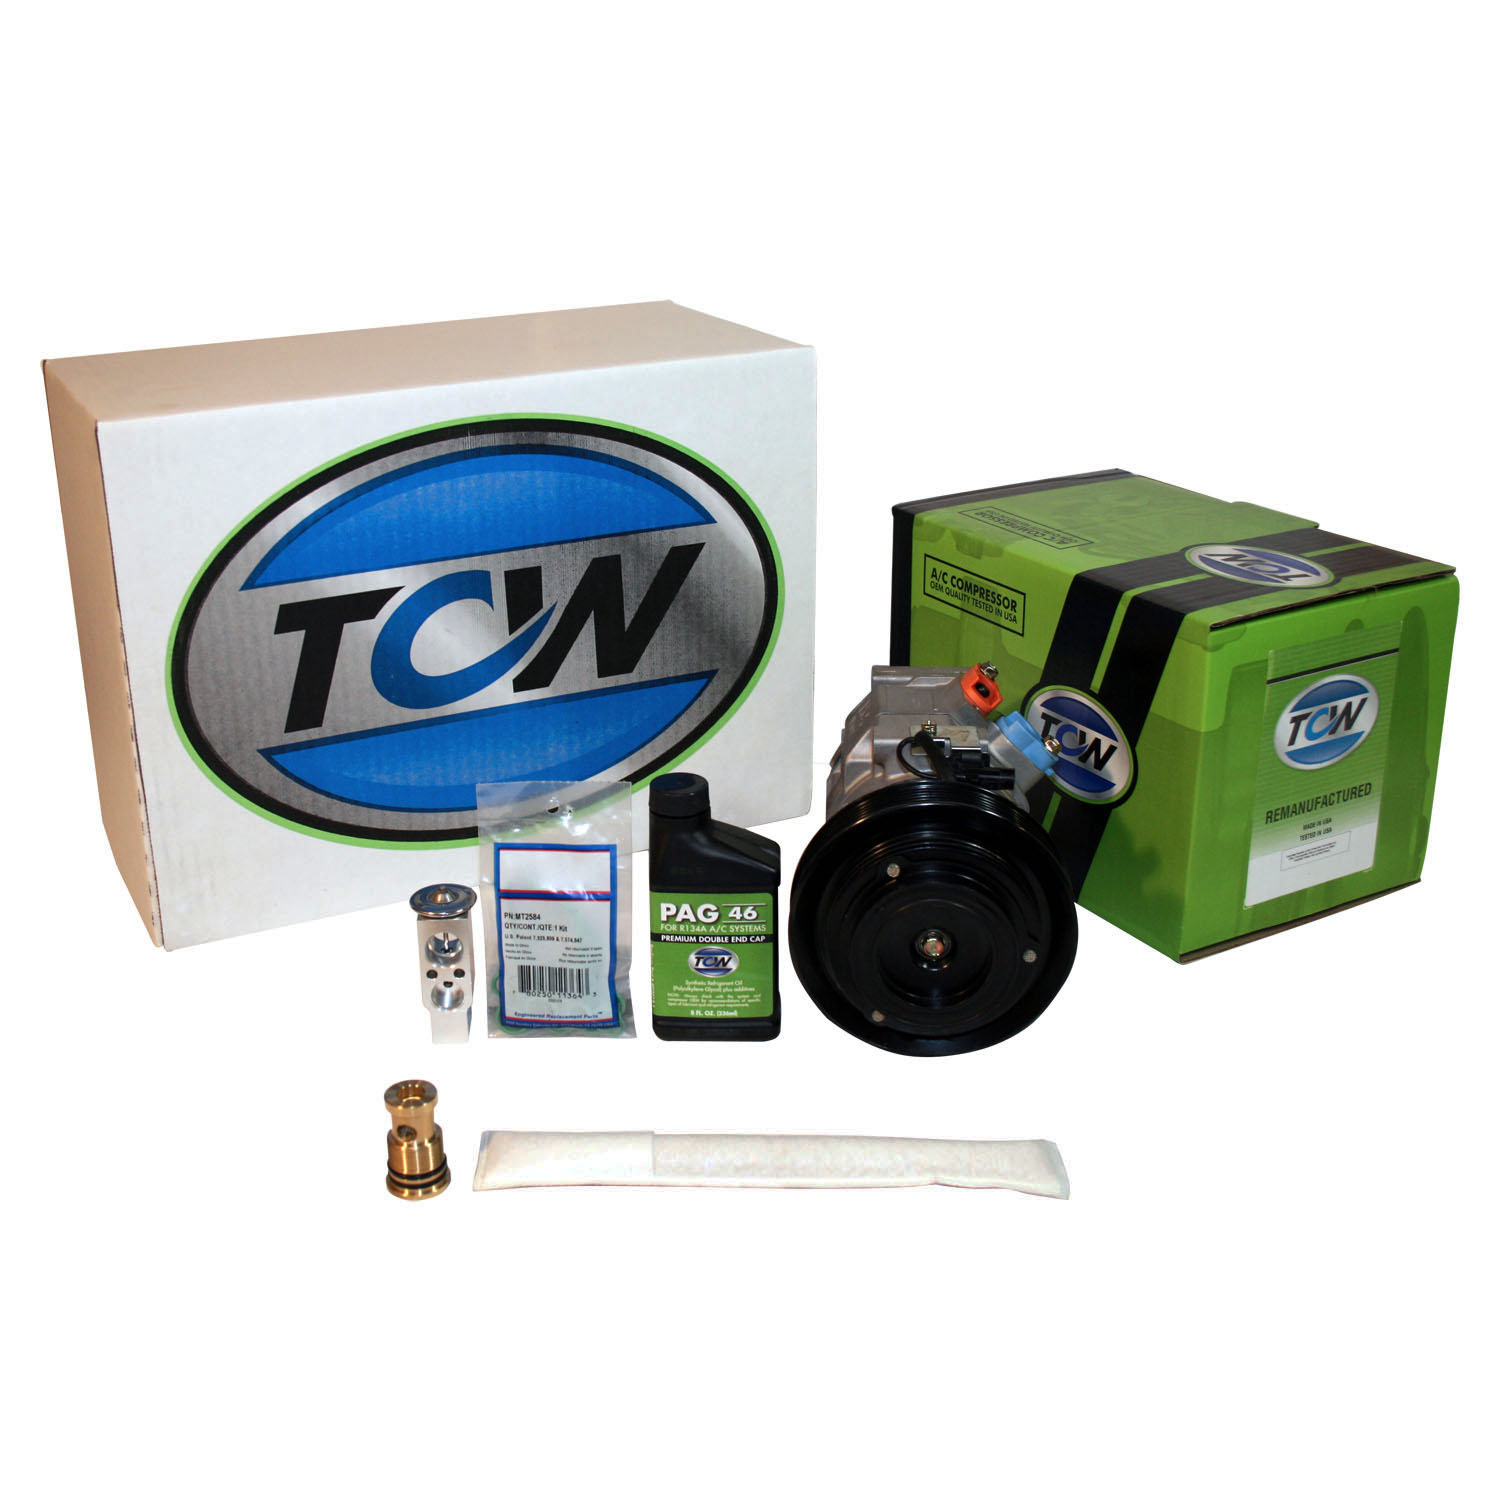 TCW Vehicle A/C Kit K1000272R Remanufactured Product Image field_60b6a13a6e67c